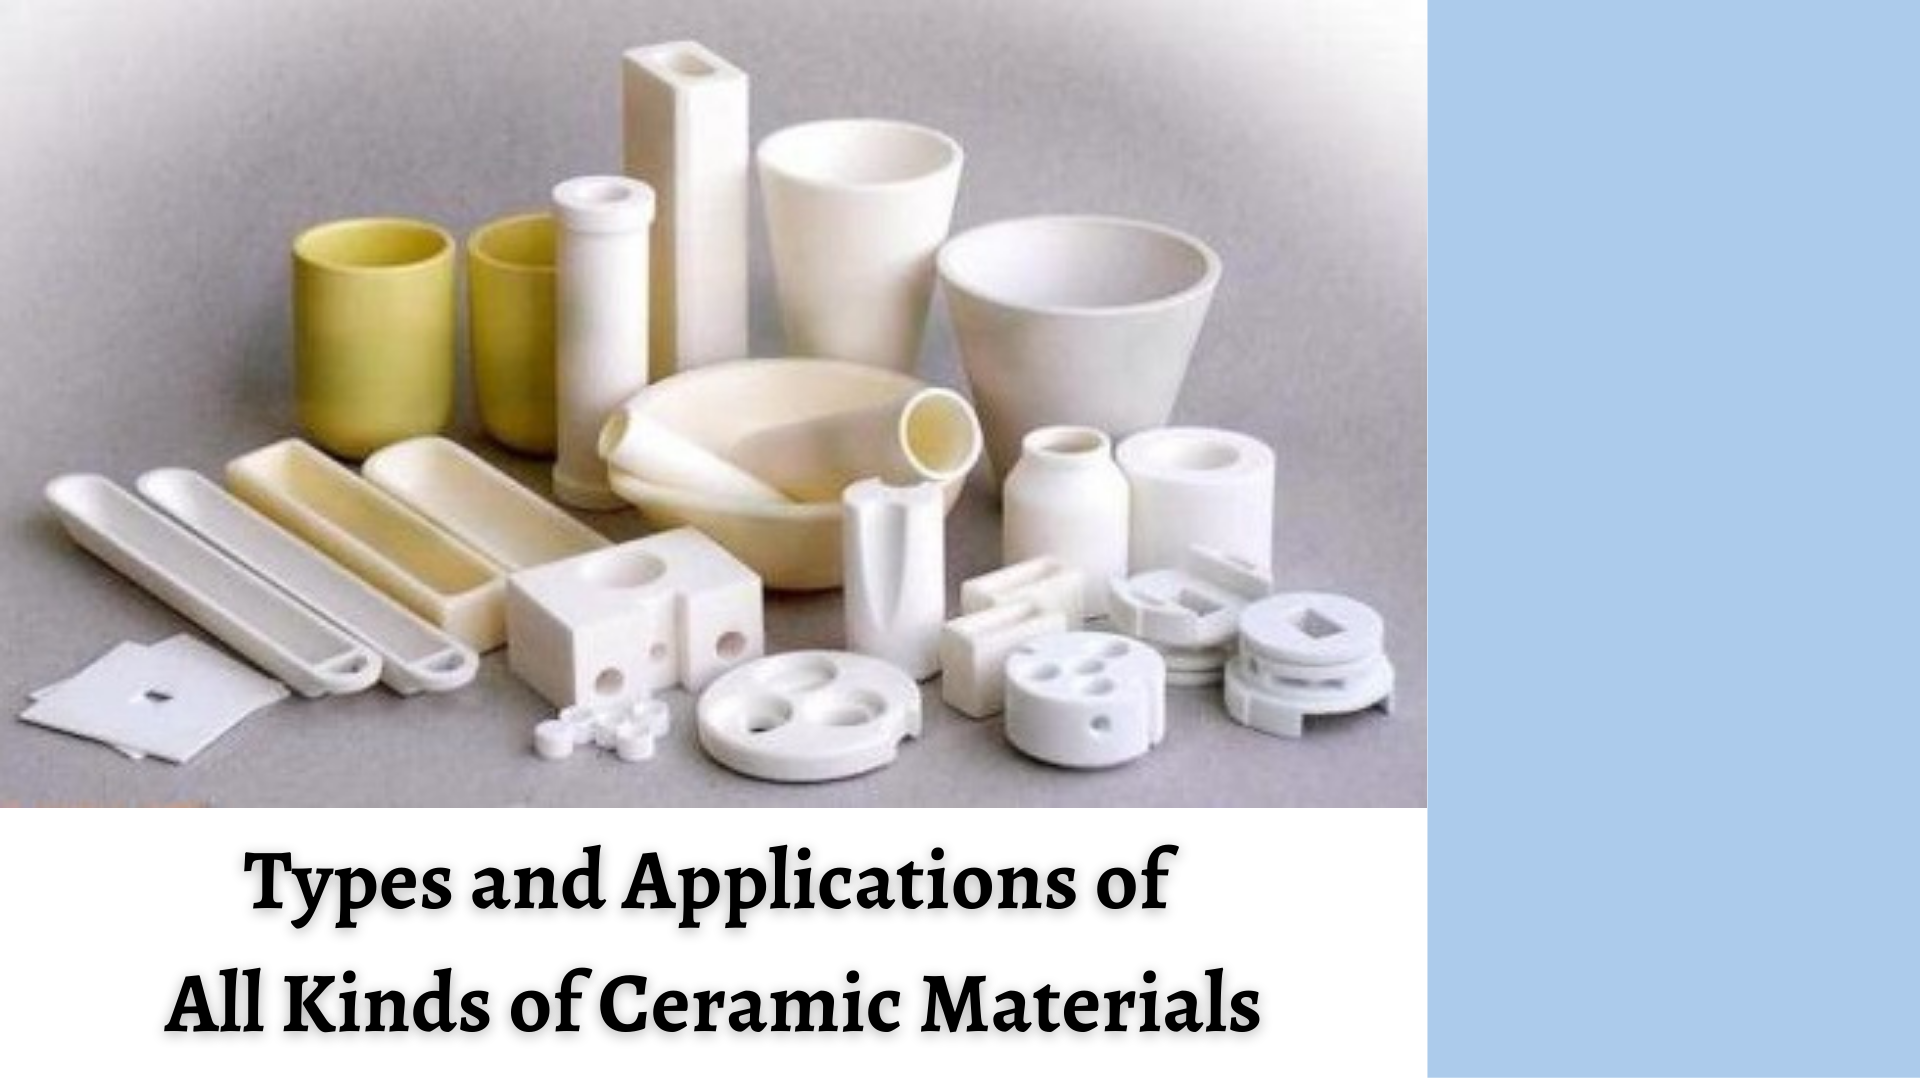 Types and Applications of All Kinds of Ceramic Materials